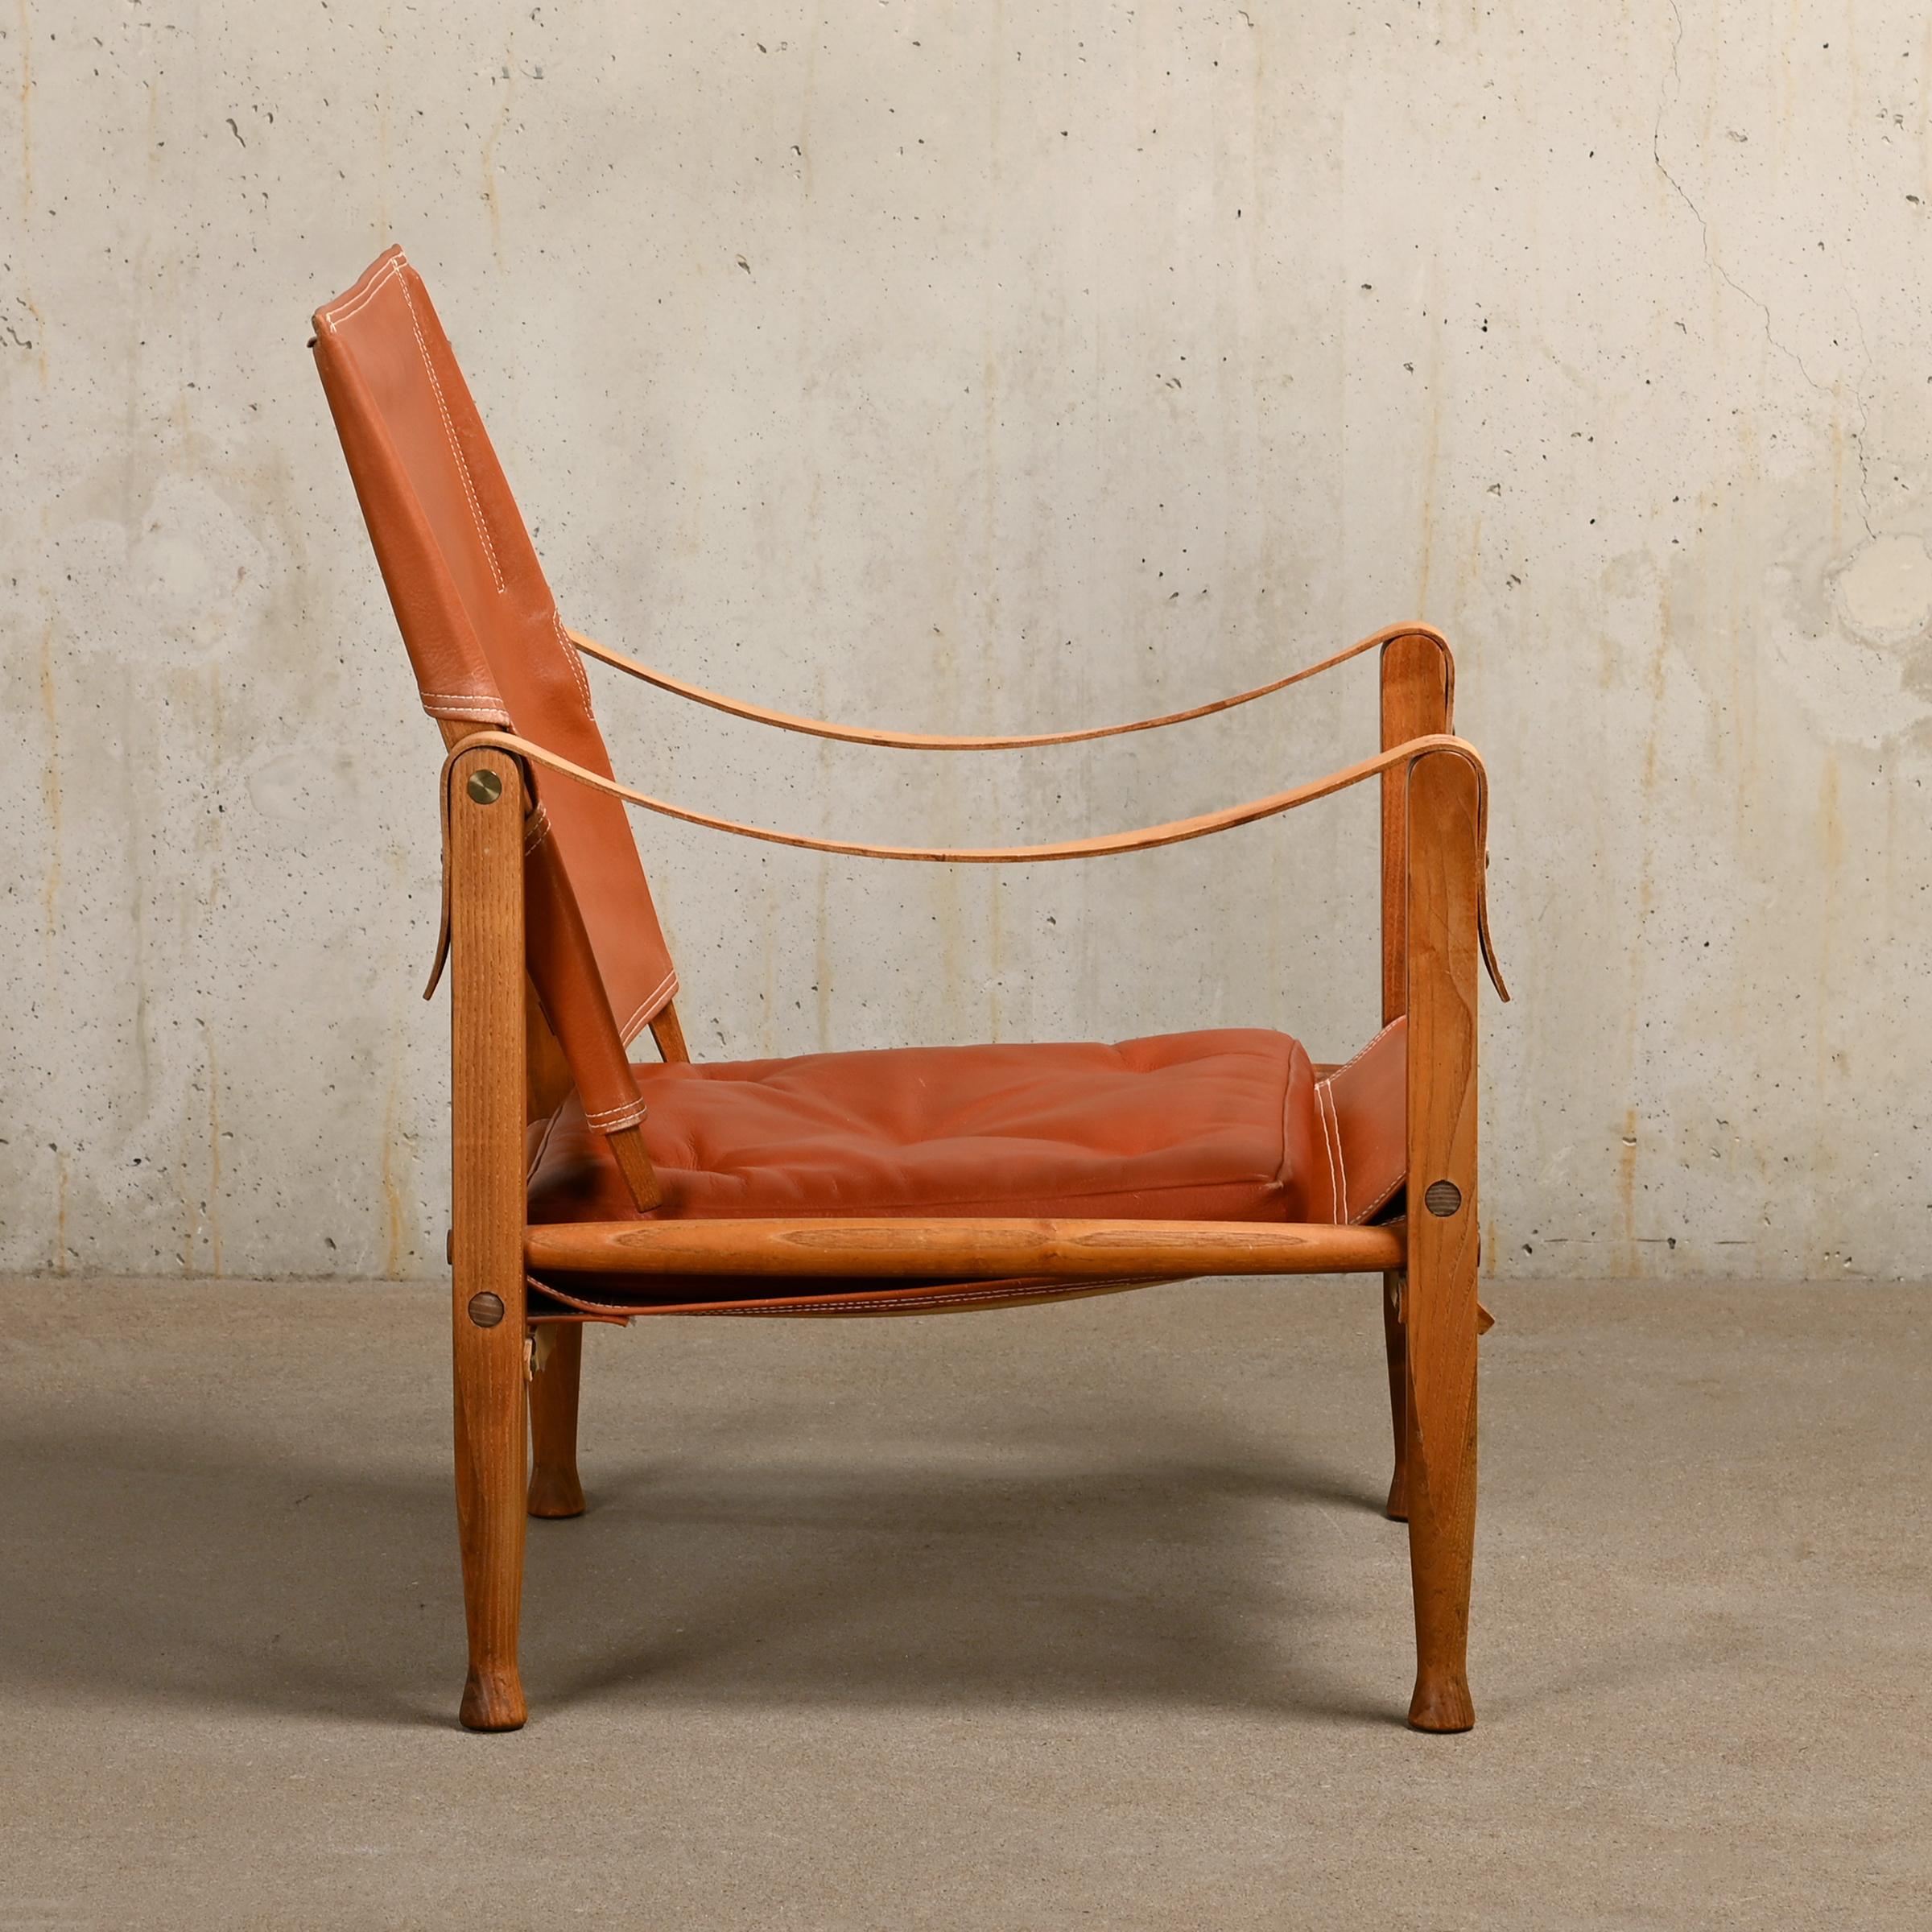 Mid-20th Century Kaare Klint Safari Chair in Brown Leather and Ash for Rud Rasmussen, Denmark